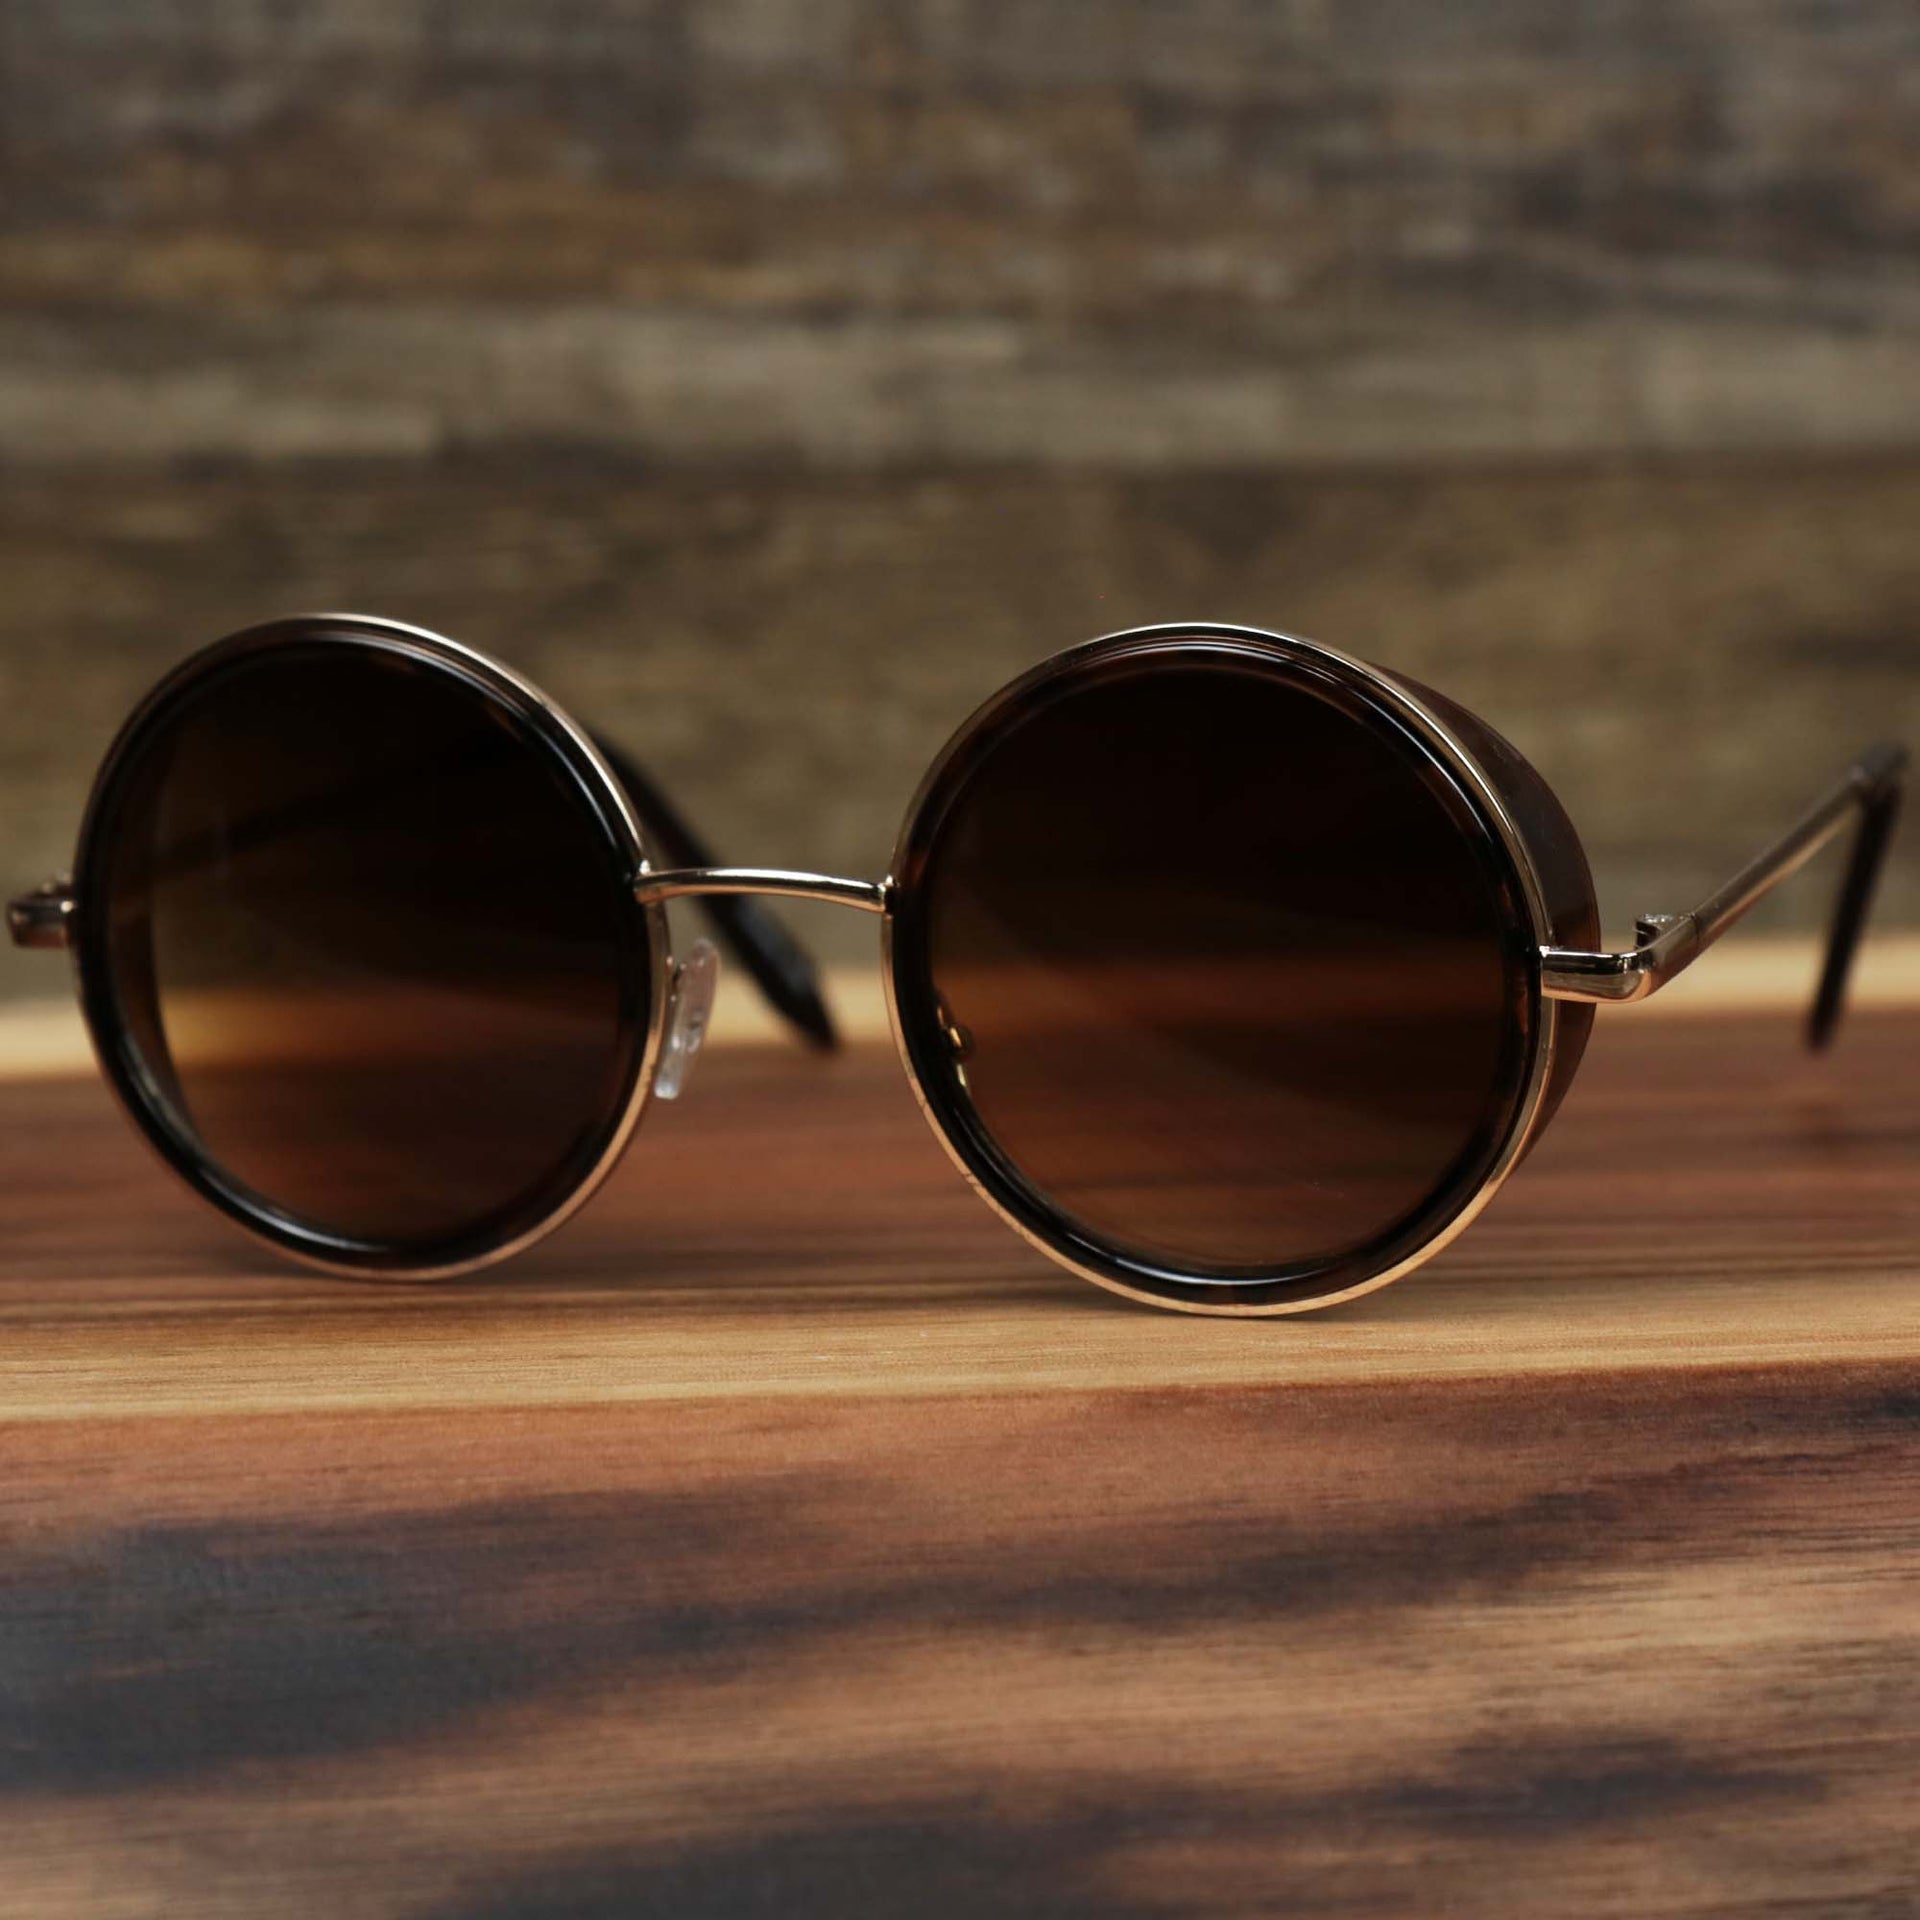 The Circle Frame Brown Lens Sunglasses with Tortoise Frame